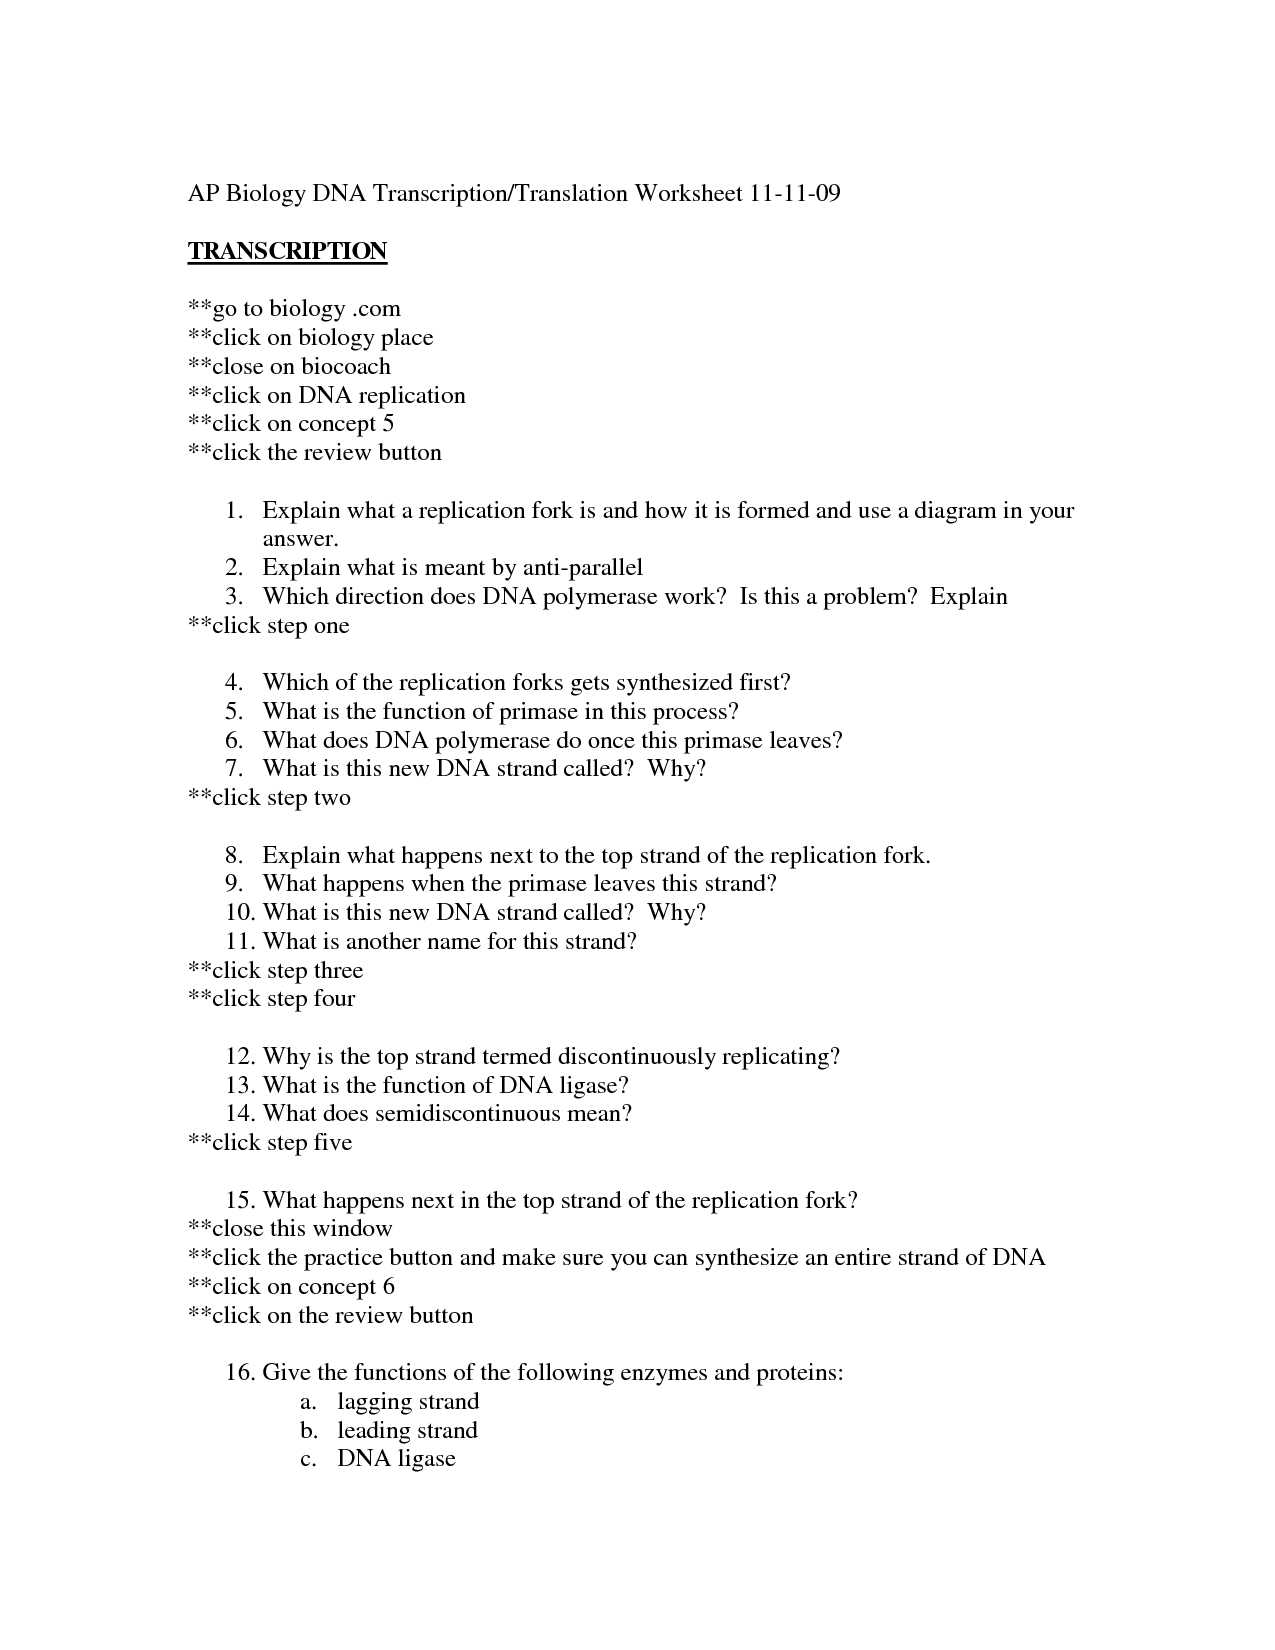 Protein Synthesis Worksheet Answer Key and Protein Synthesis Transcription and Translation Worksheet Image